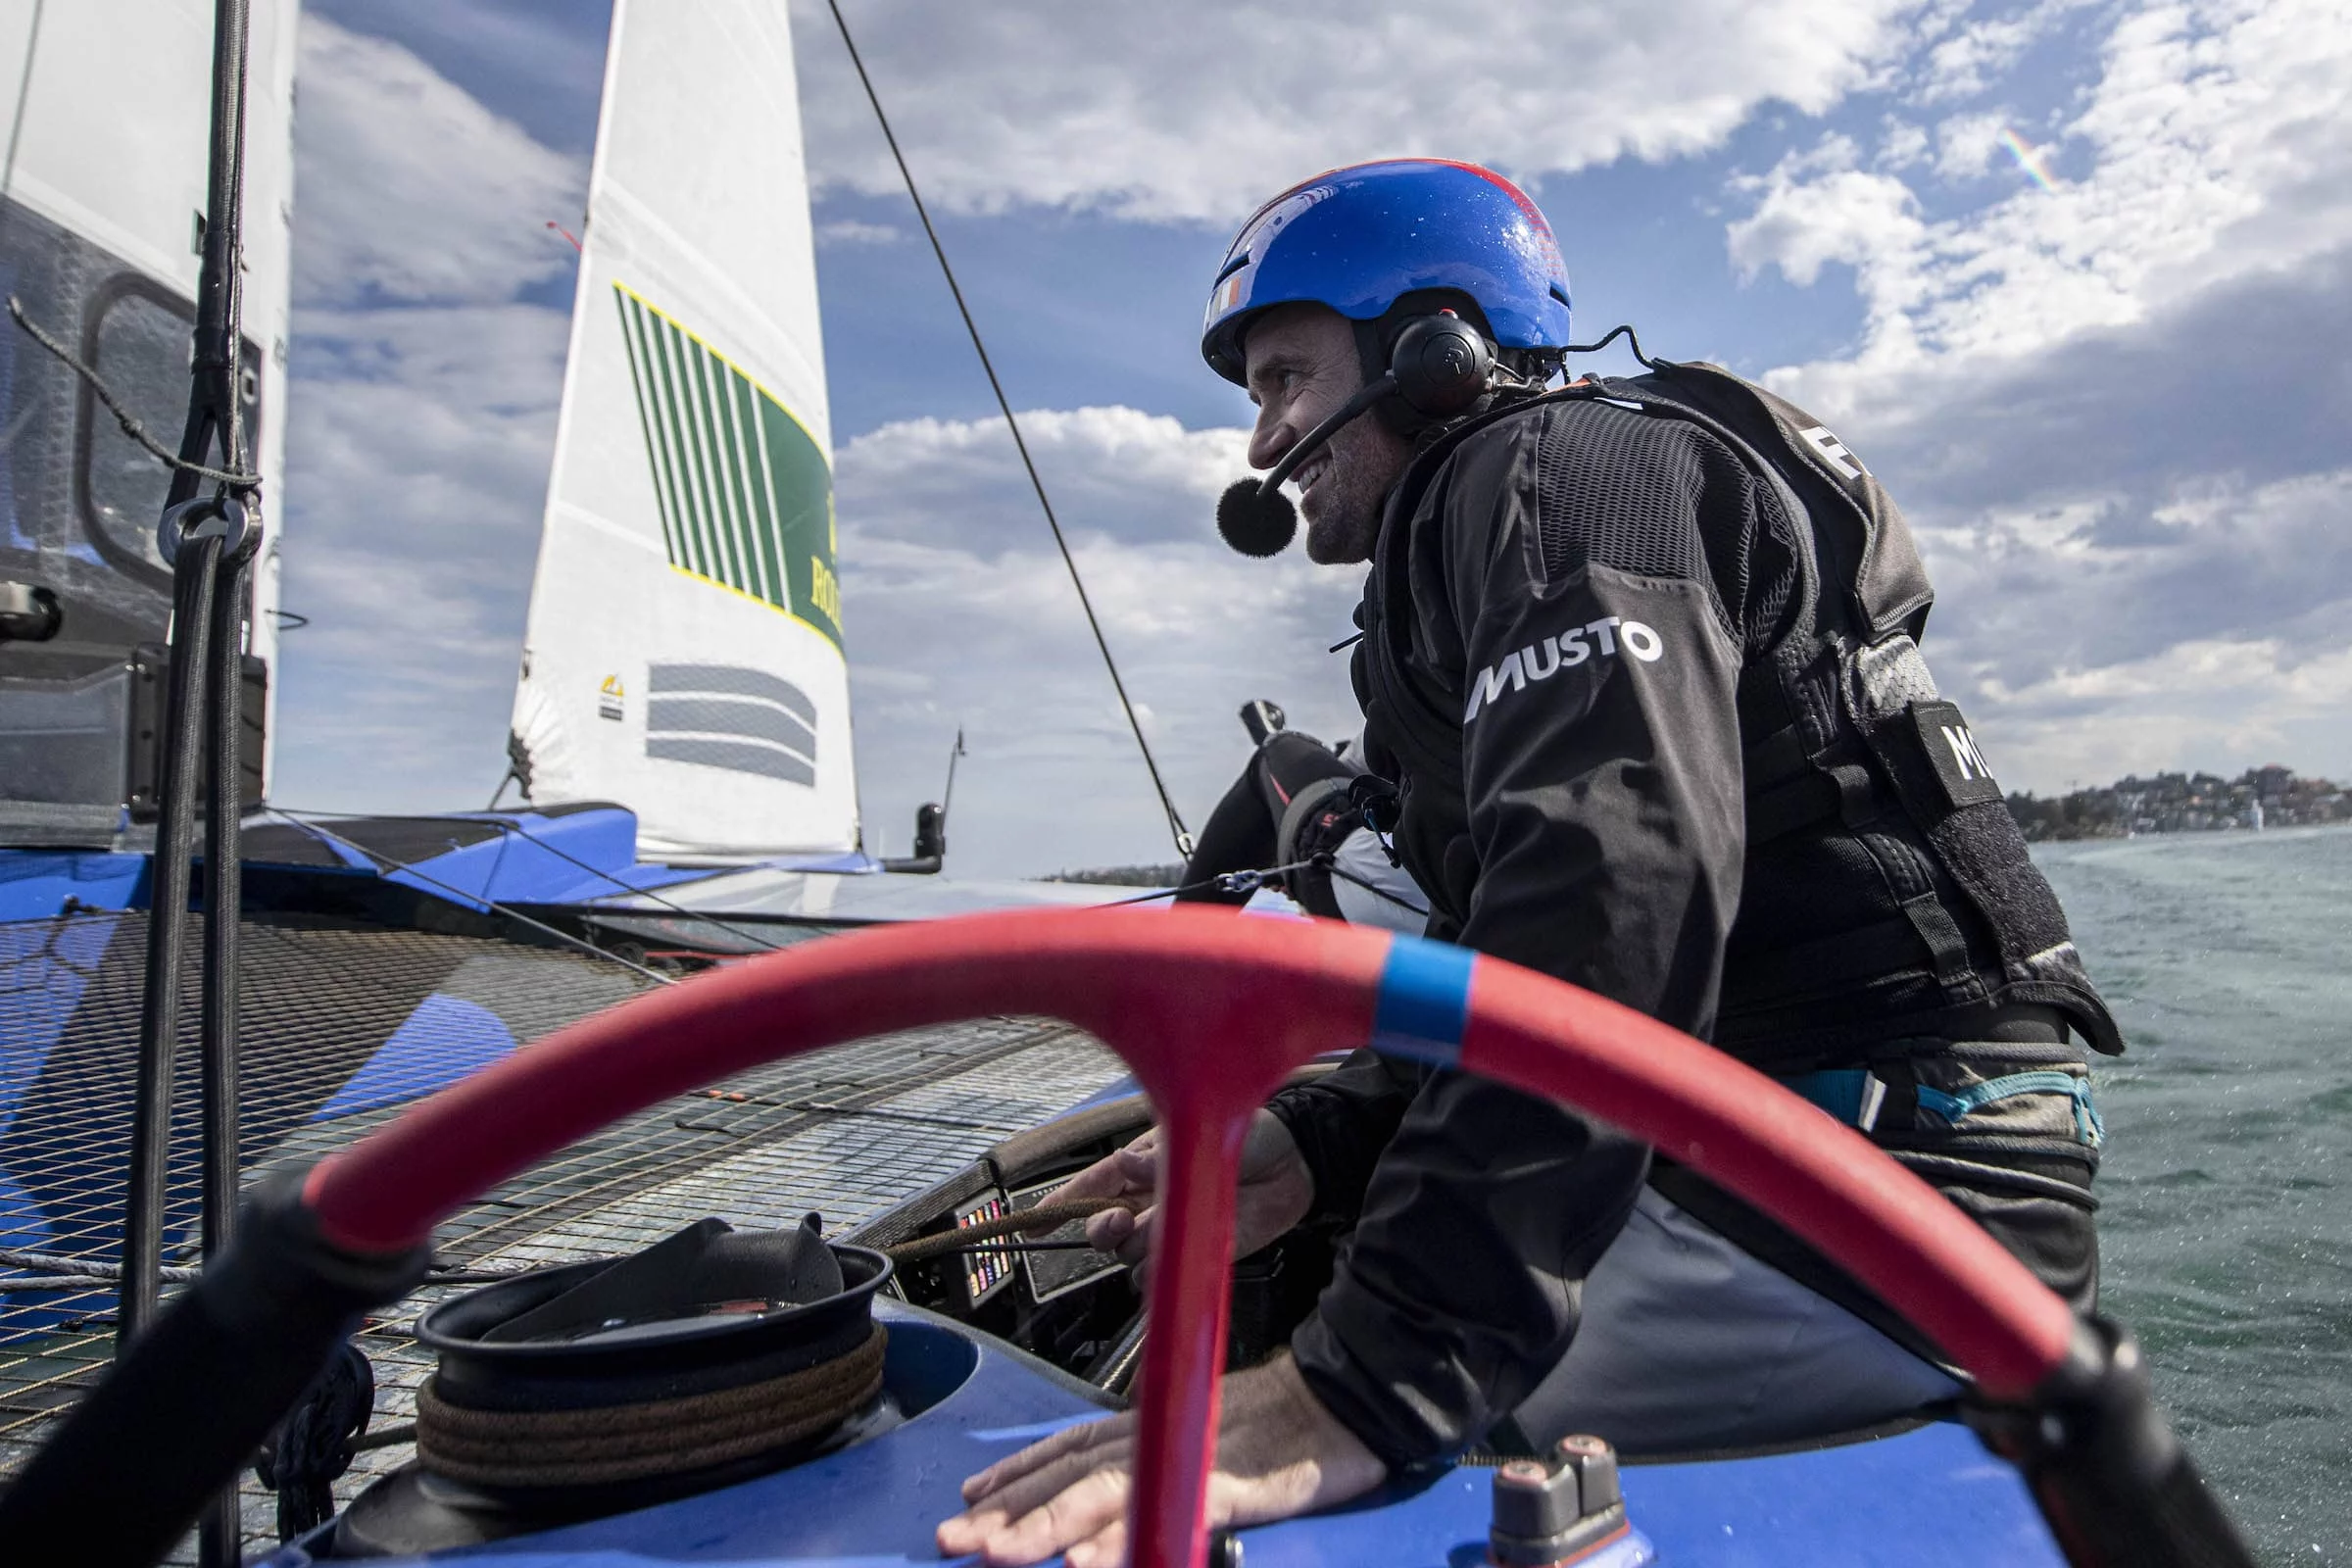 Musto launch new and improved lpx foiling range designed with france sailgp team